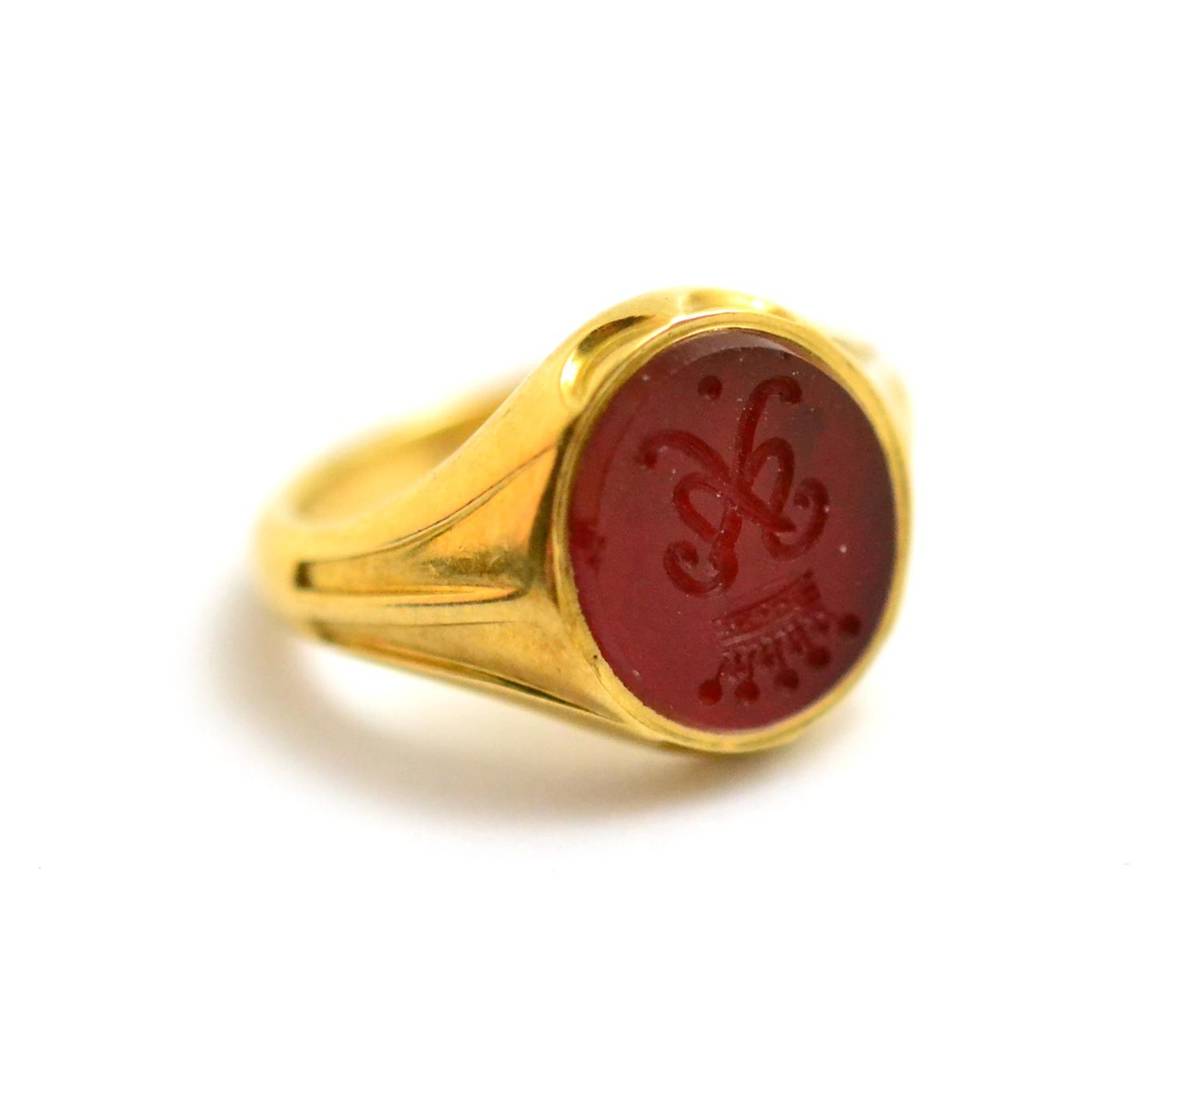 Lot 157 - A signet ring with intaglio crest inset